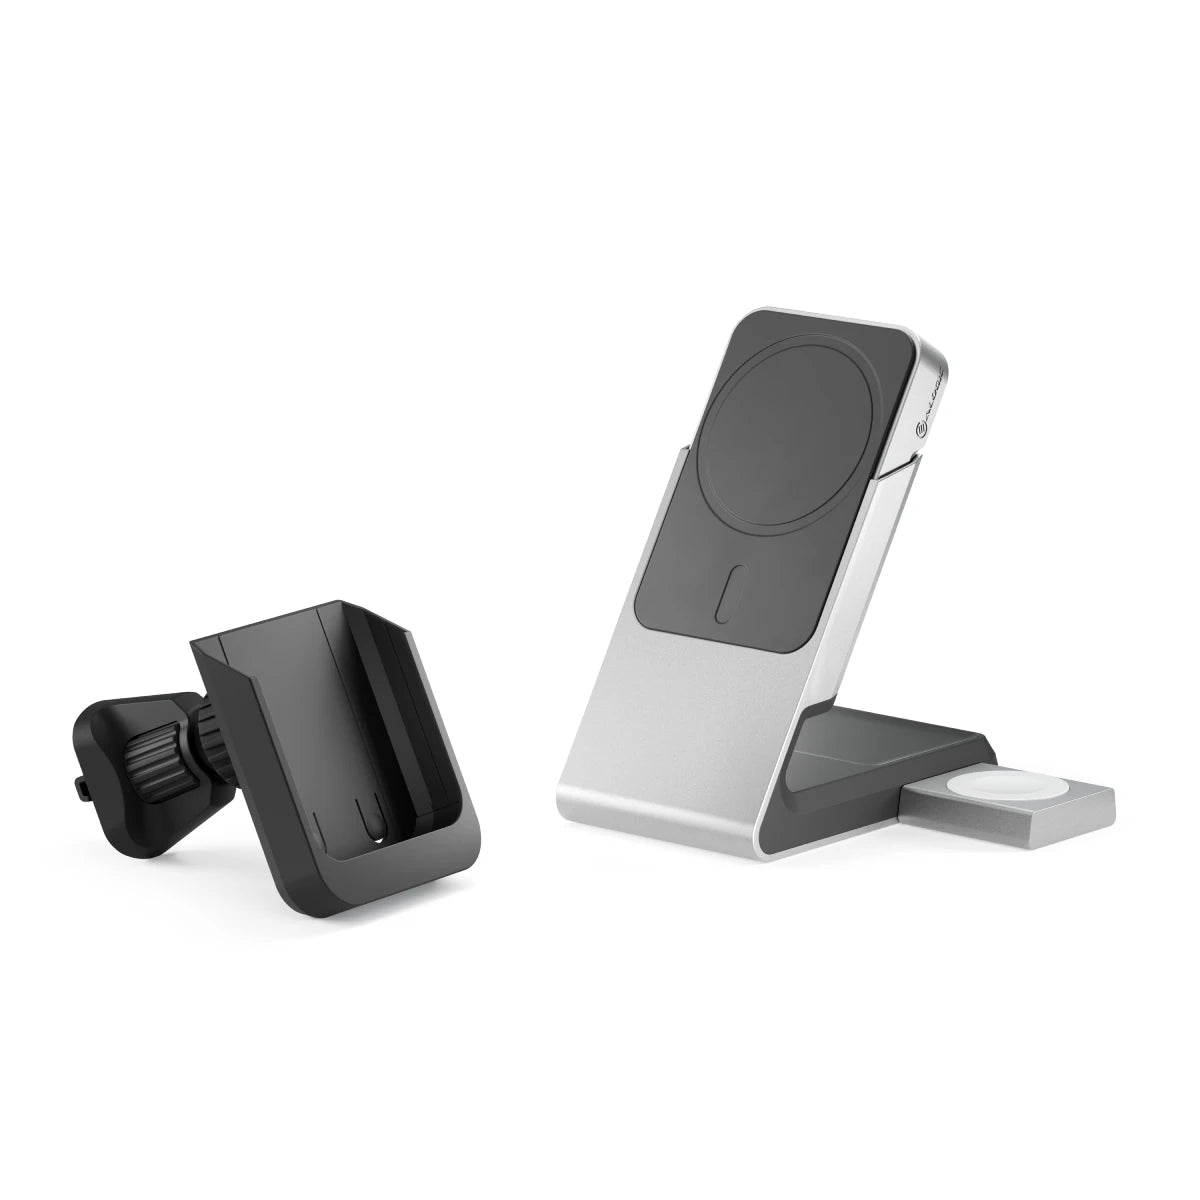 matrix-flow-3-in-1-dock-power-bank-and-car-charger1